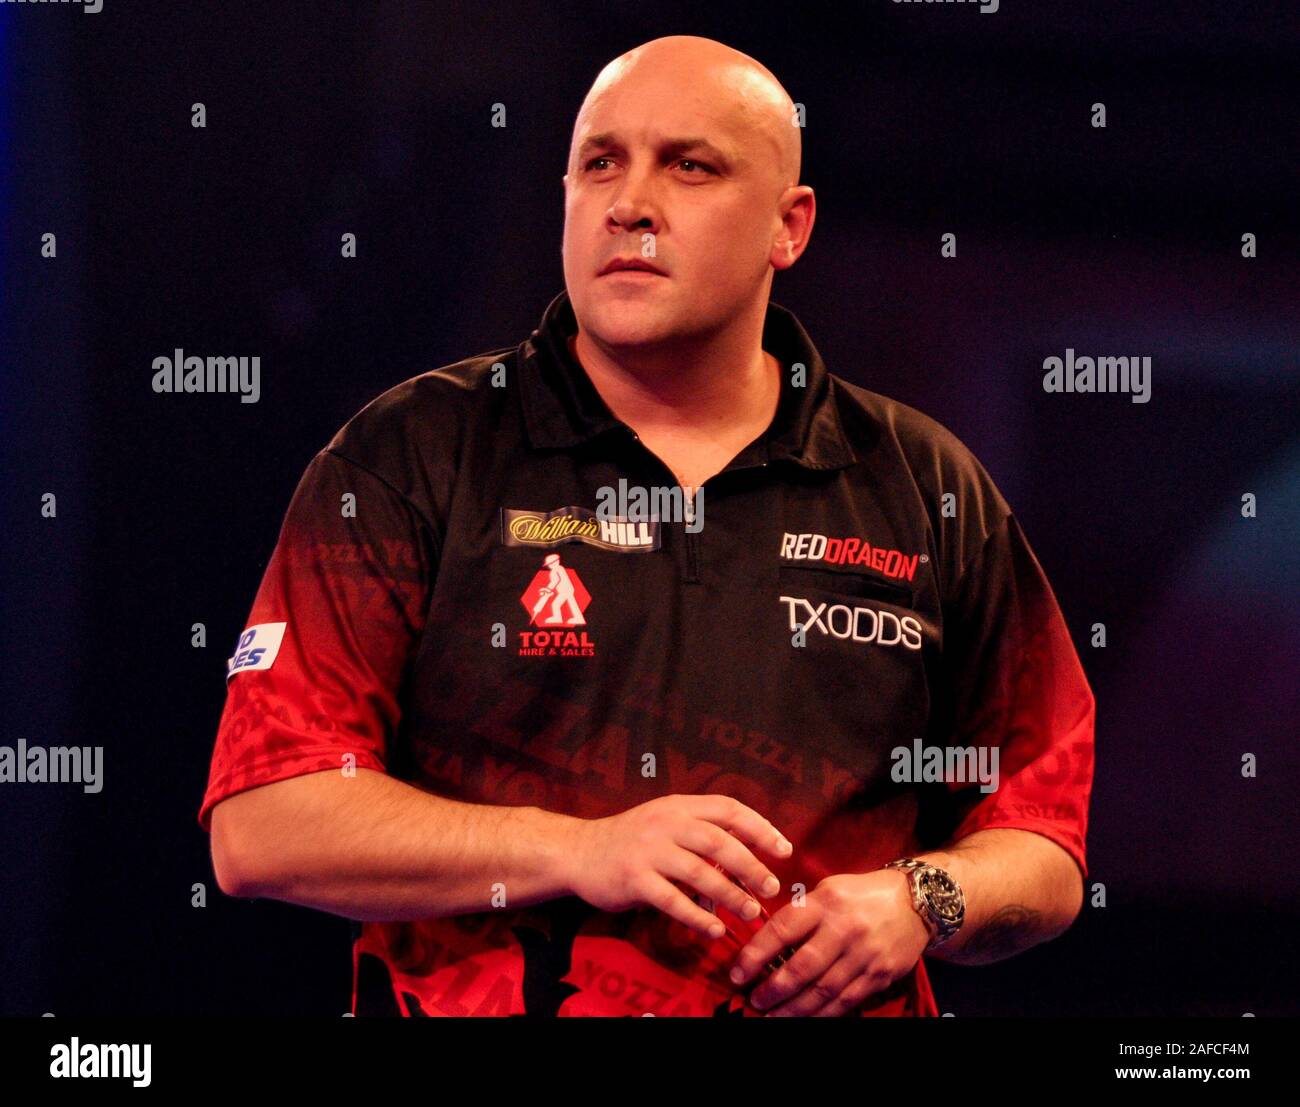 14 december 2019 London, Great Britain William Hill World Darts Championship  Jamie Hughes during day 2 of the William Hill World Darts Championship of  darts at Alexandra Palace (Ally Pally) in Londen